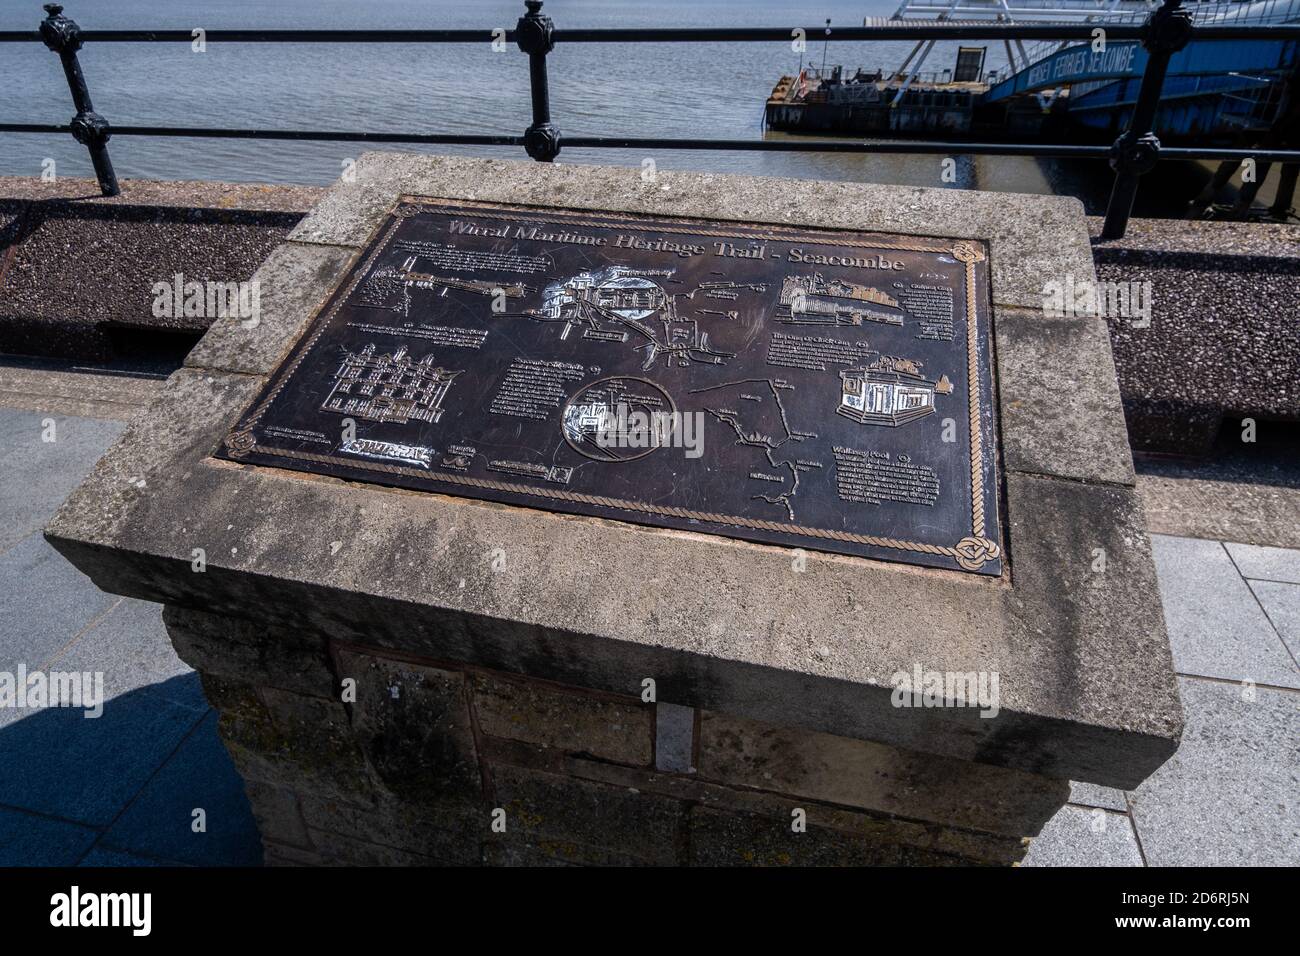 Plinth and plaque for the Wirral Maritime Heritage Trail Seacombe Wirral July 2020 Stock Photo